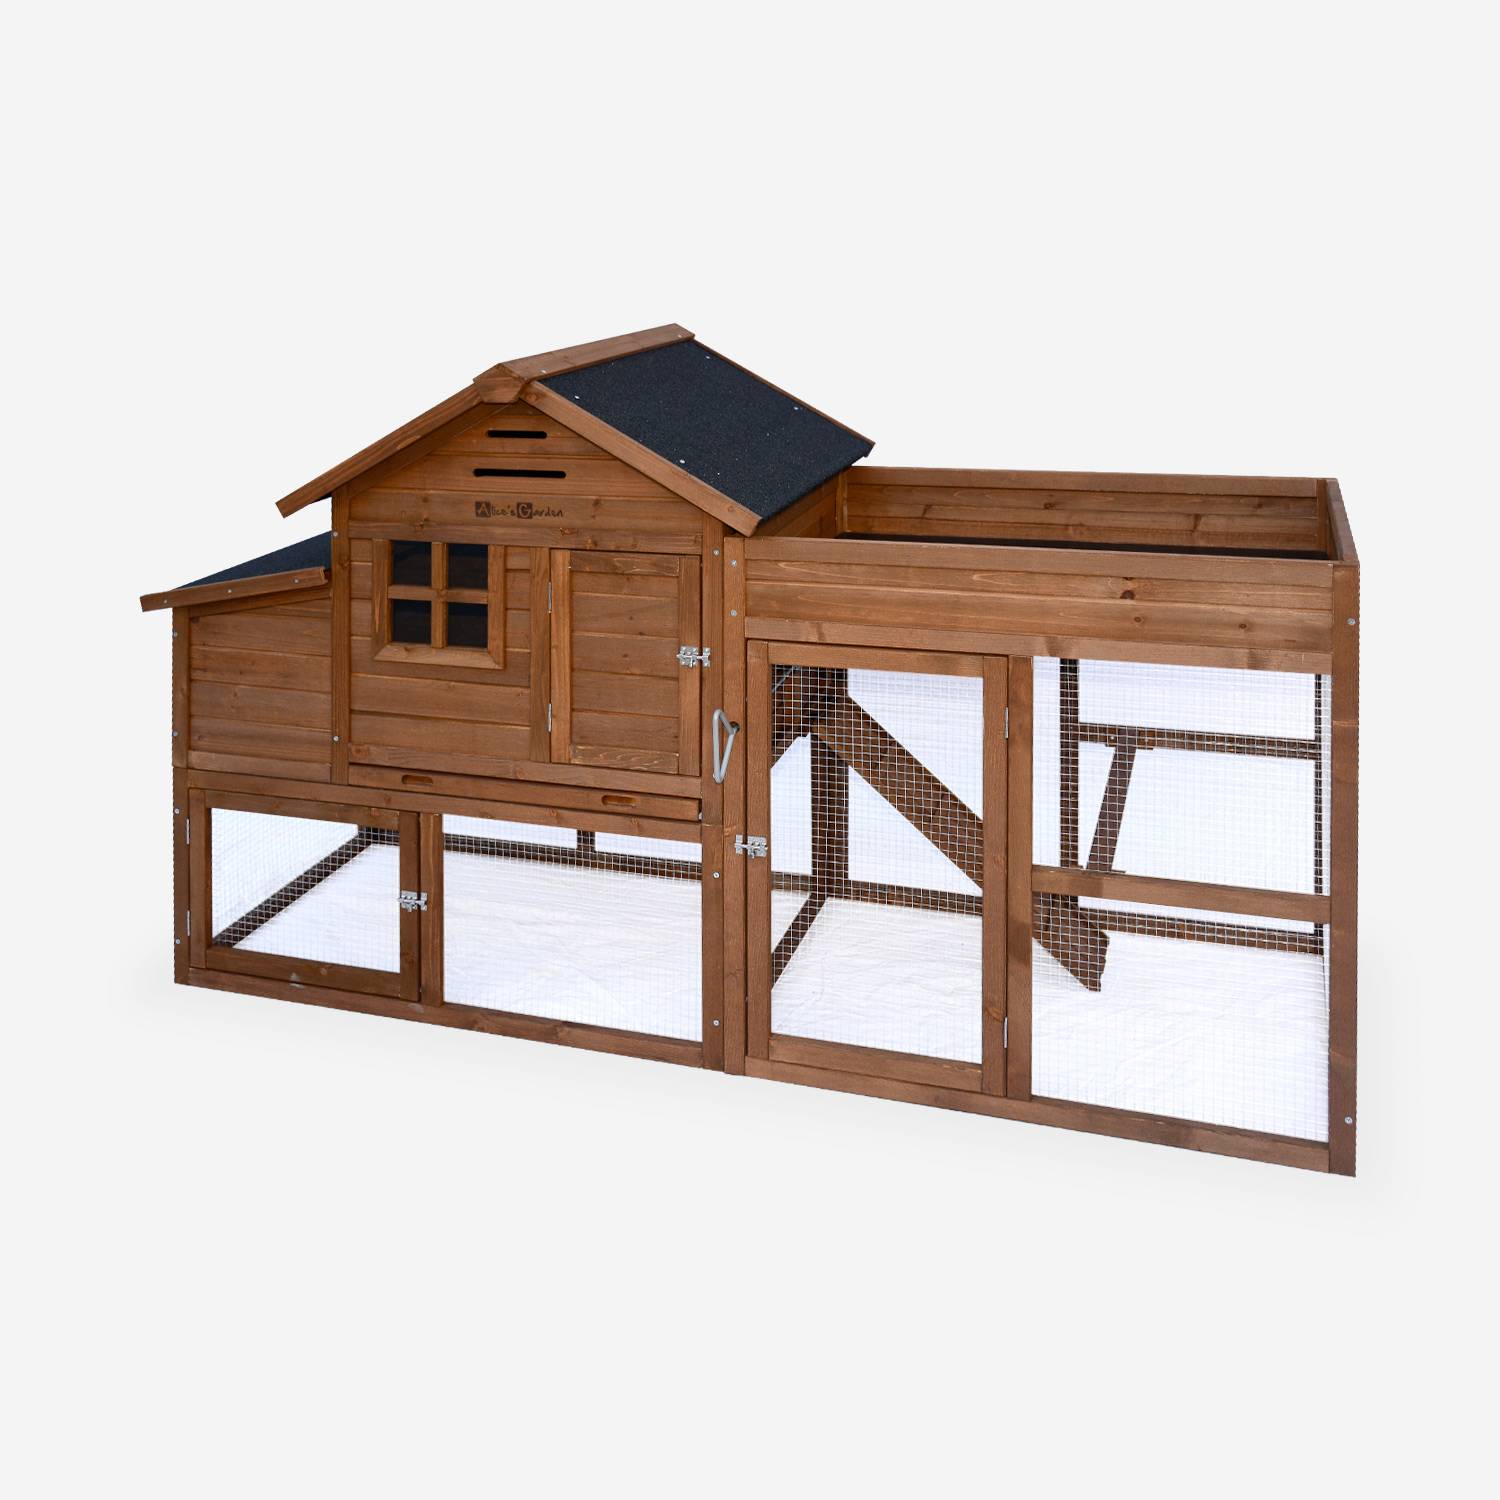 Wooden chicken coop - for 3 chickens, with enclosure and integrated planter - Campine - Wood colour,sweeek,Photo1